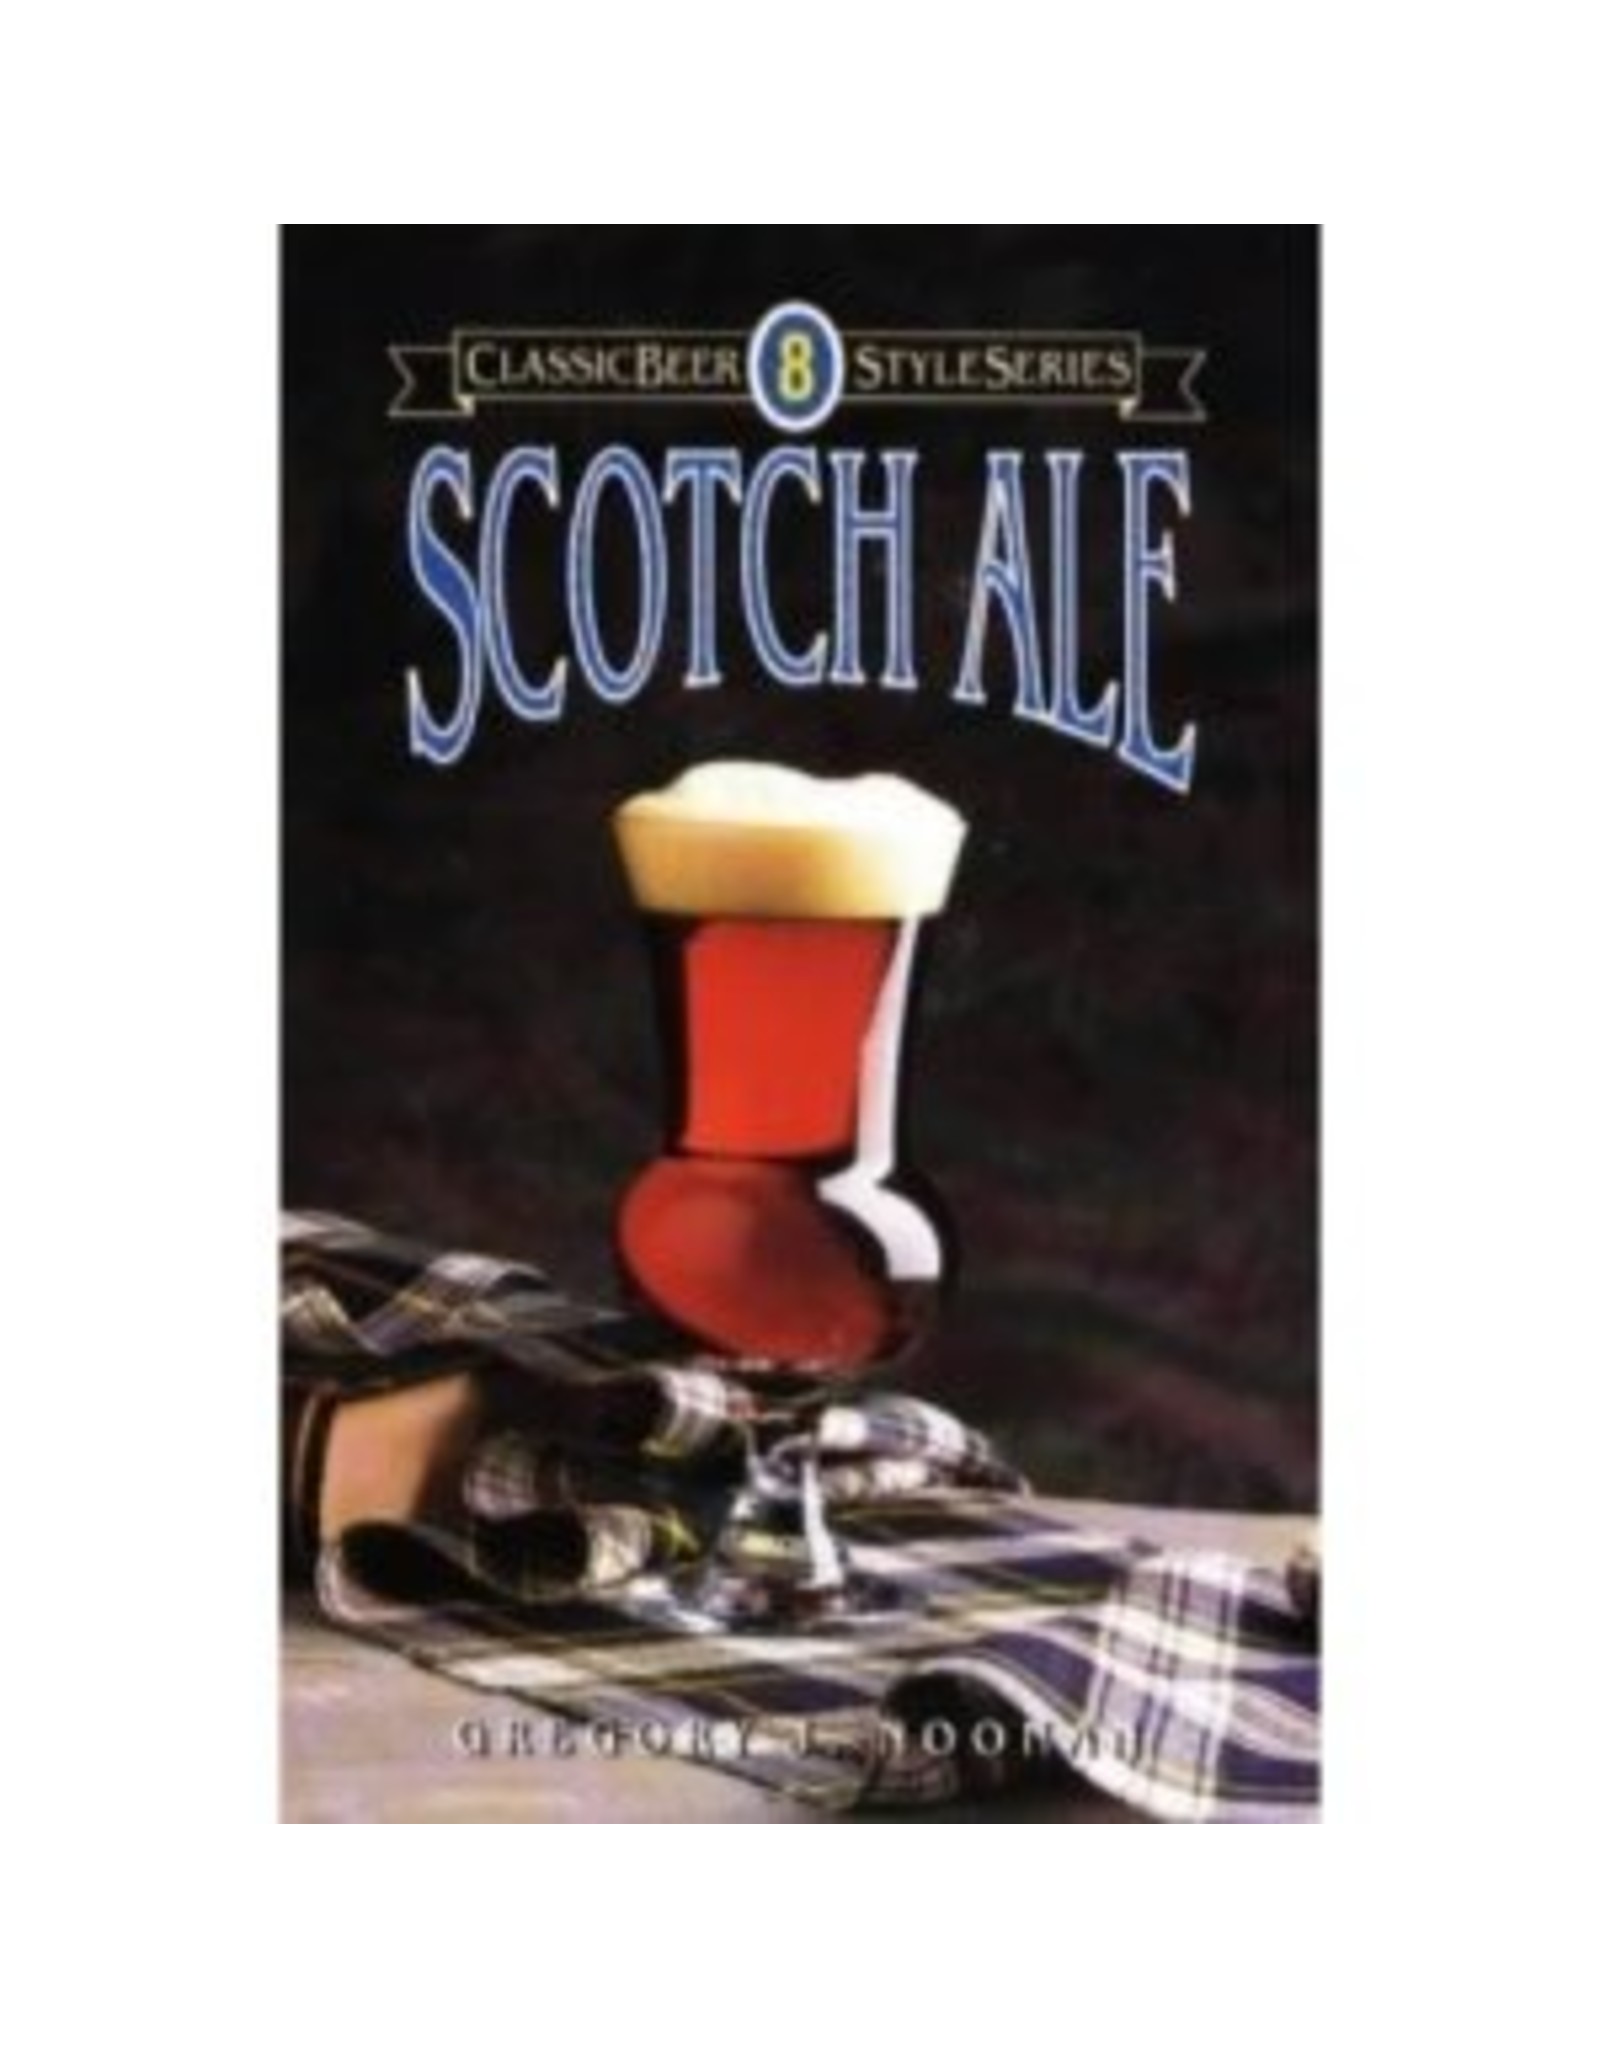 CLASSIC BEER STYLE SCOTCH ALE